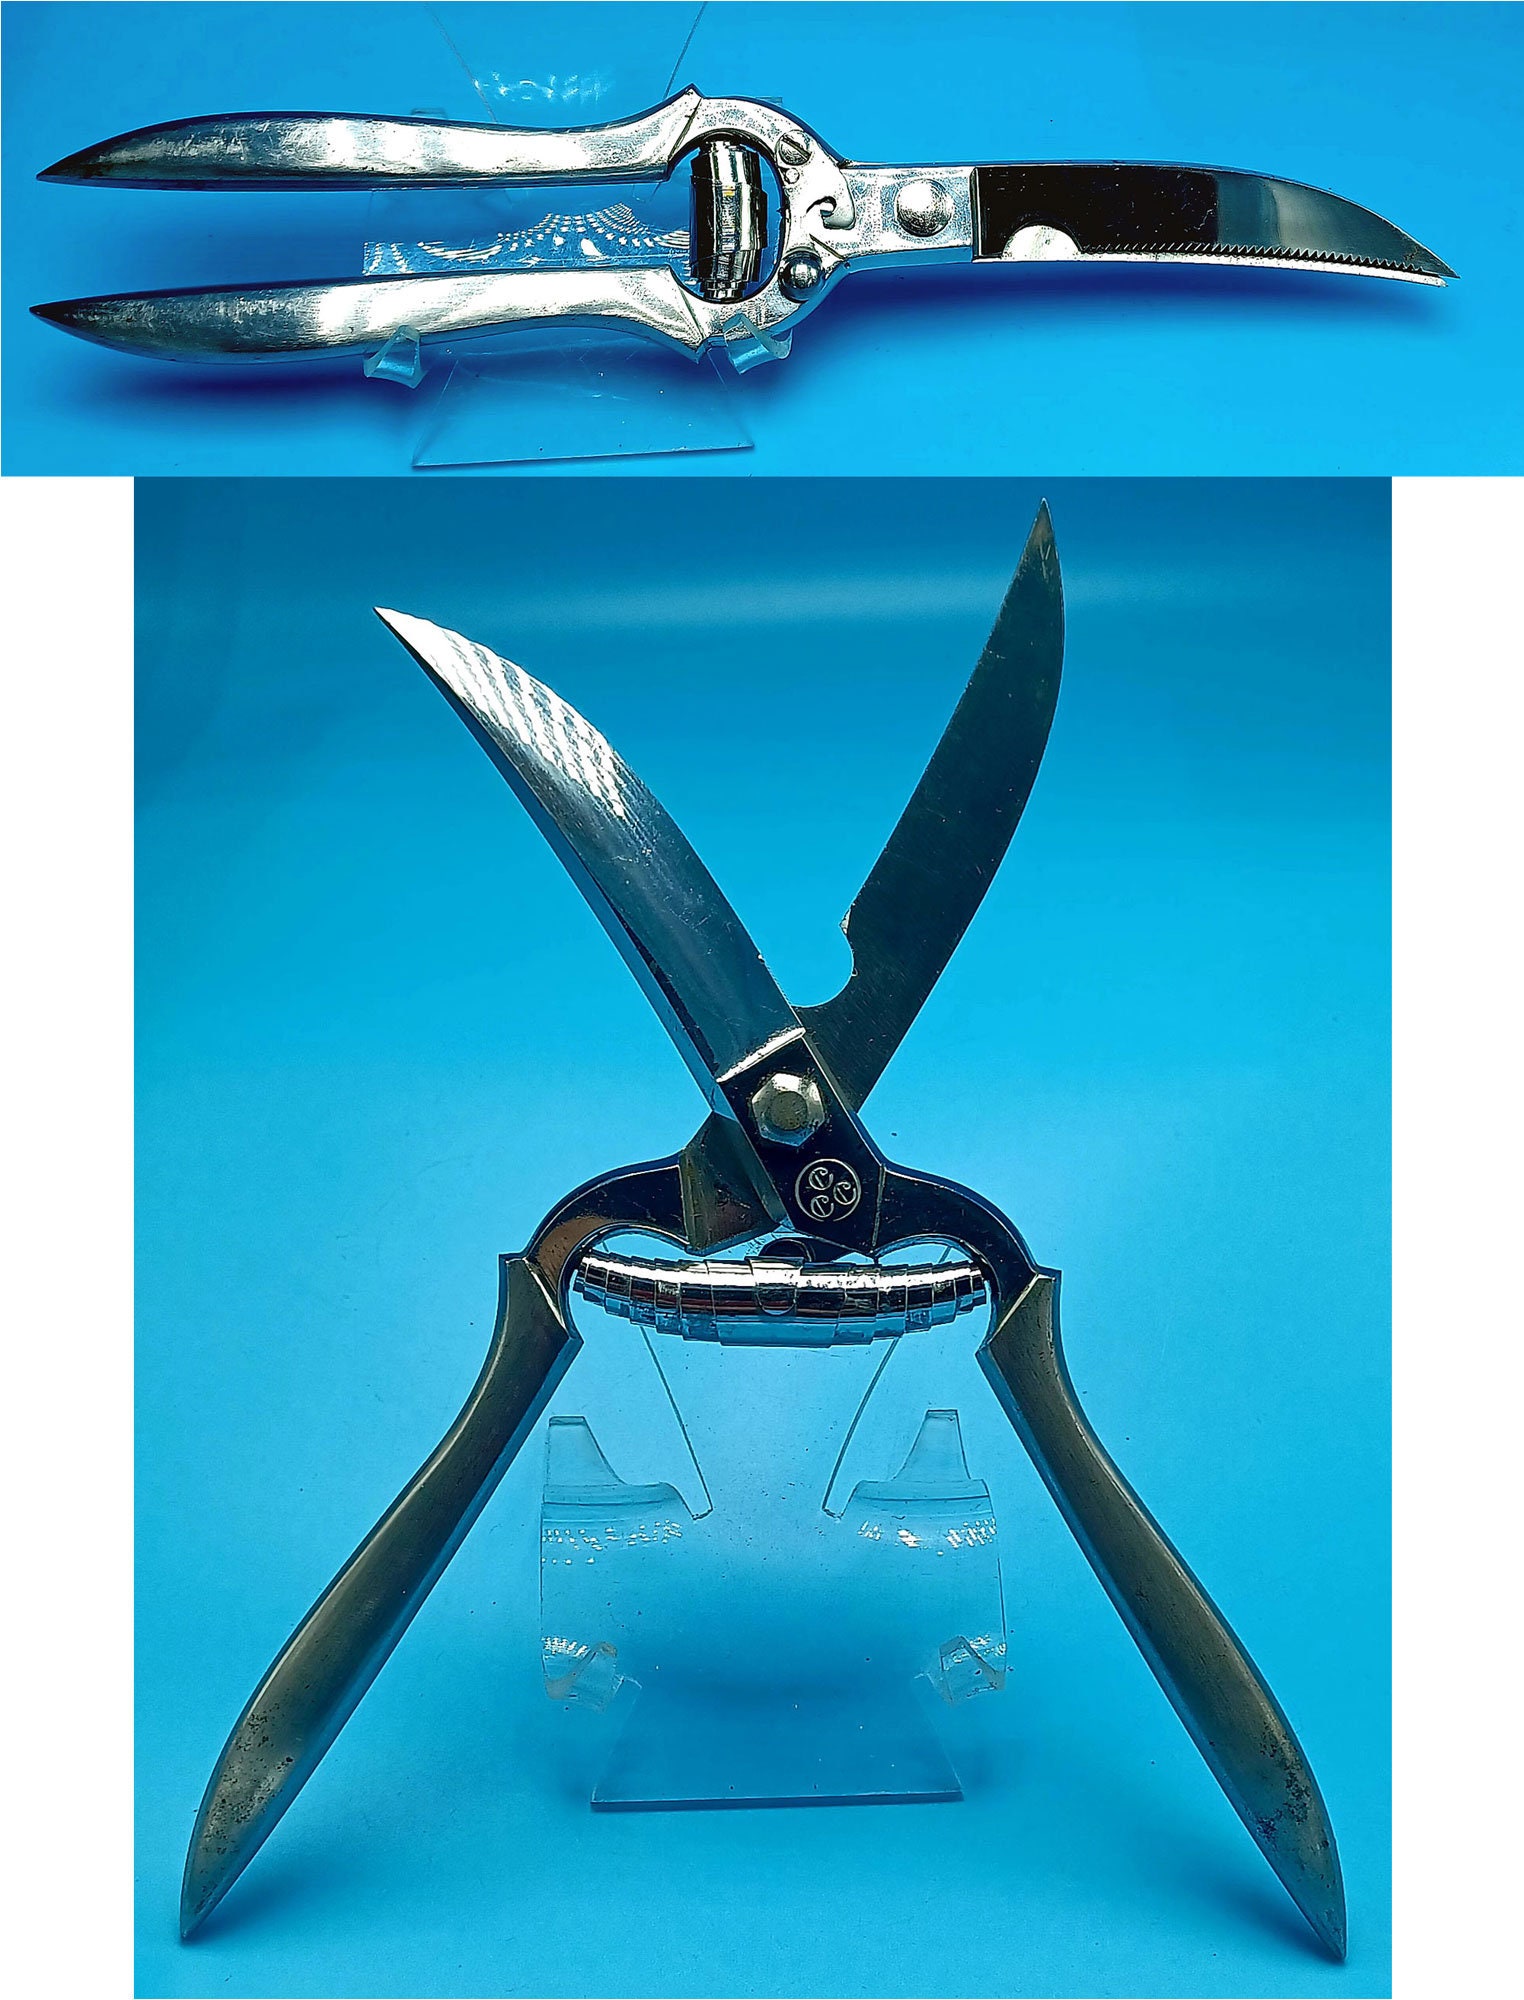 Stainless Steel Poultry Shears, Chicken Scissors with PVC Case - Tenartis  Made in Italy..